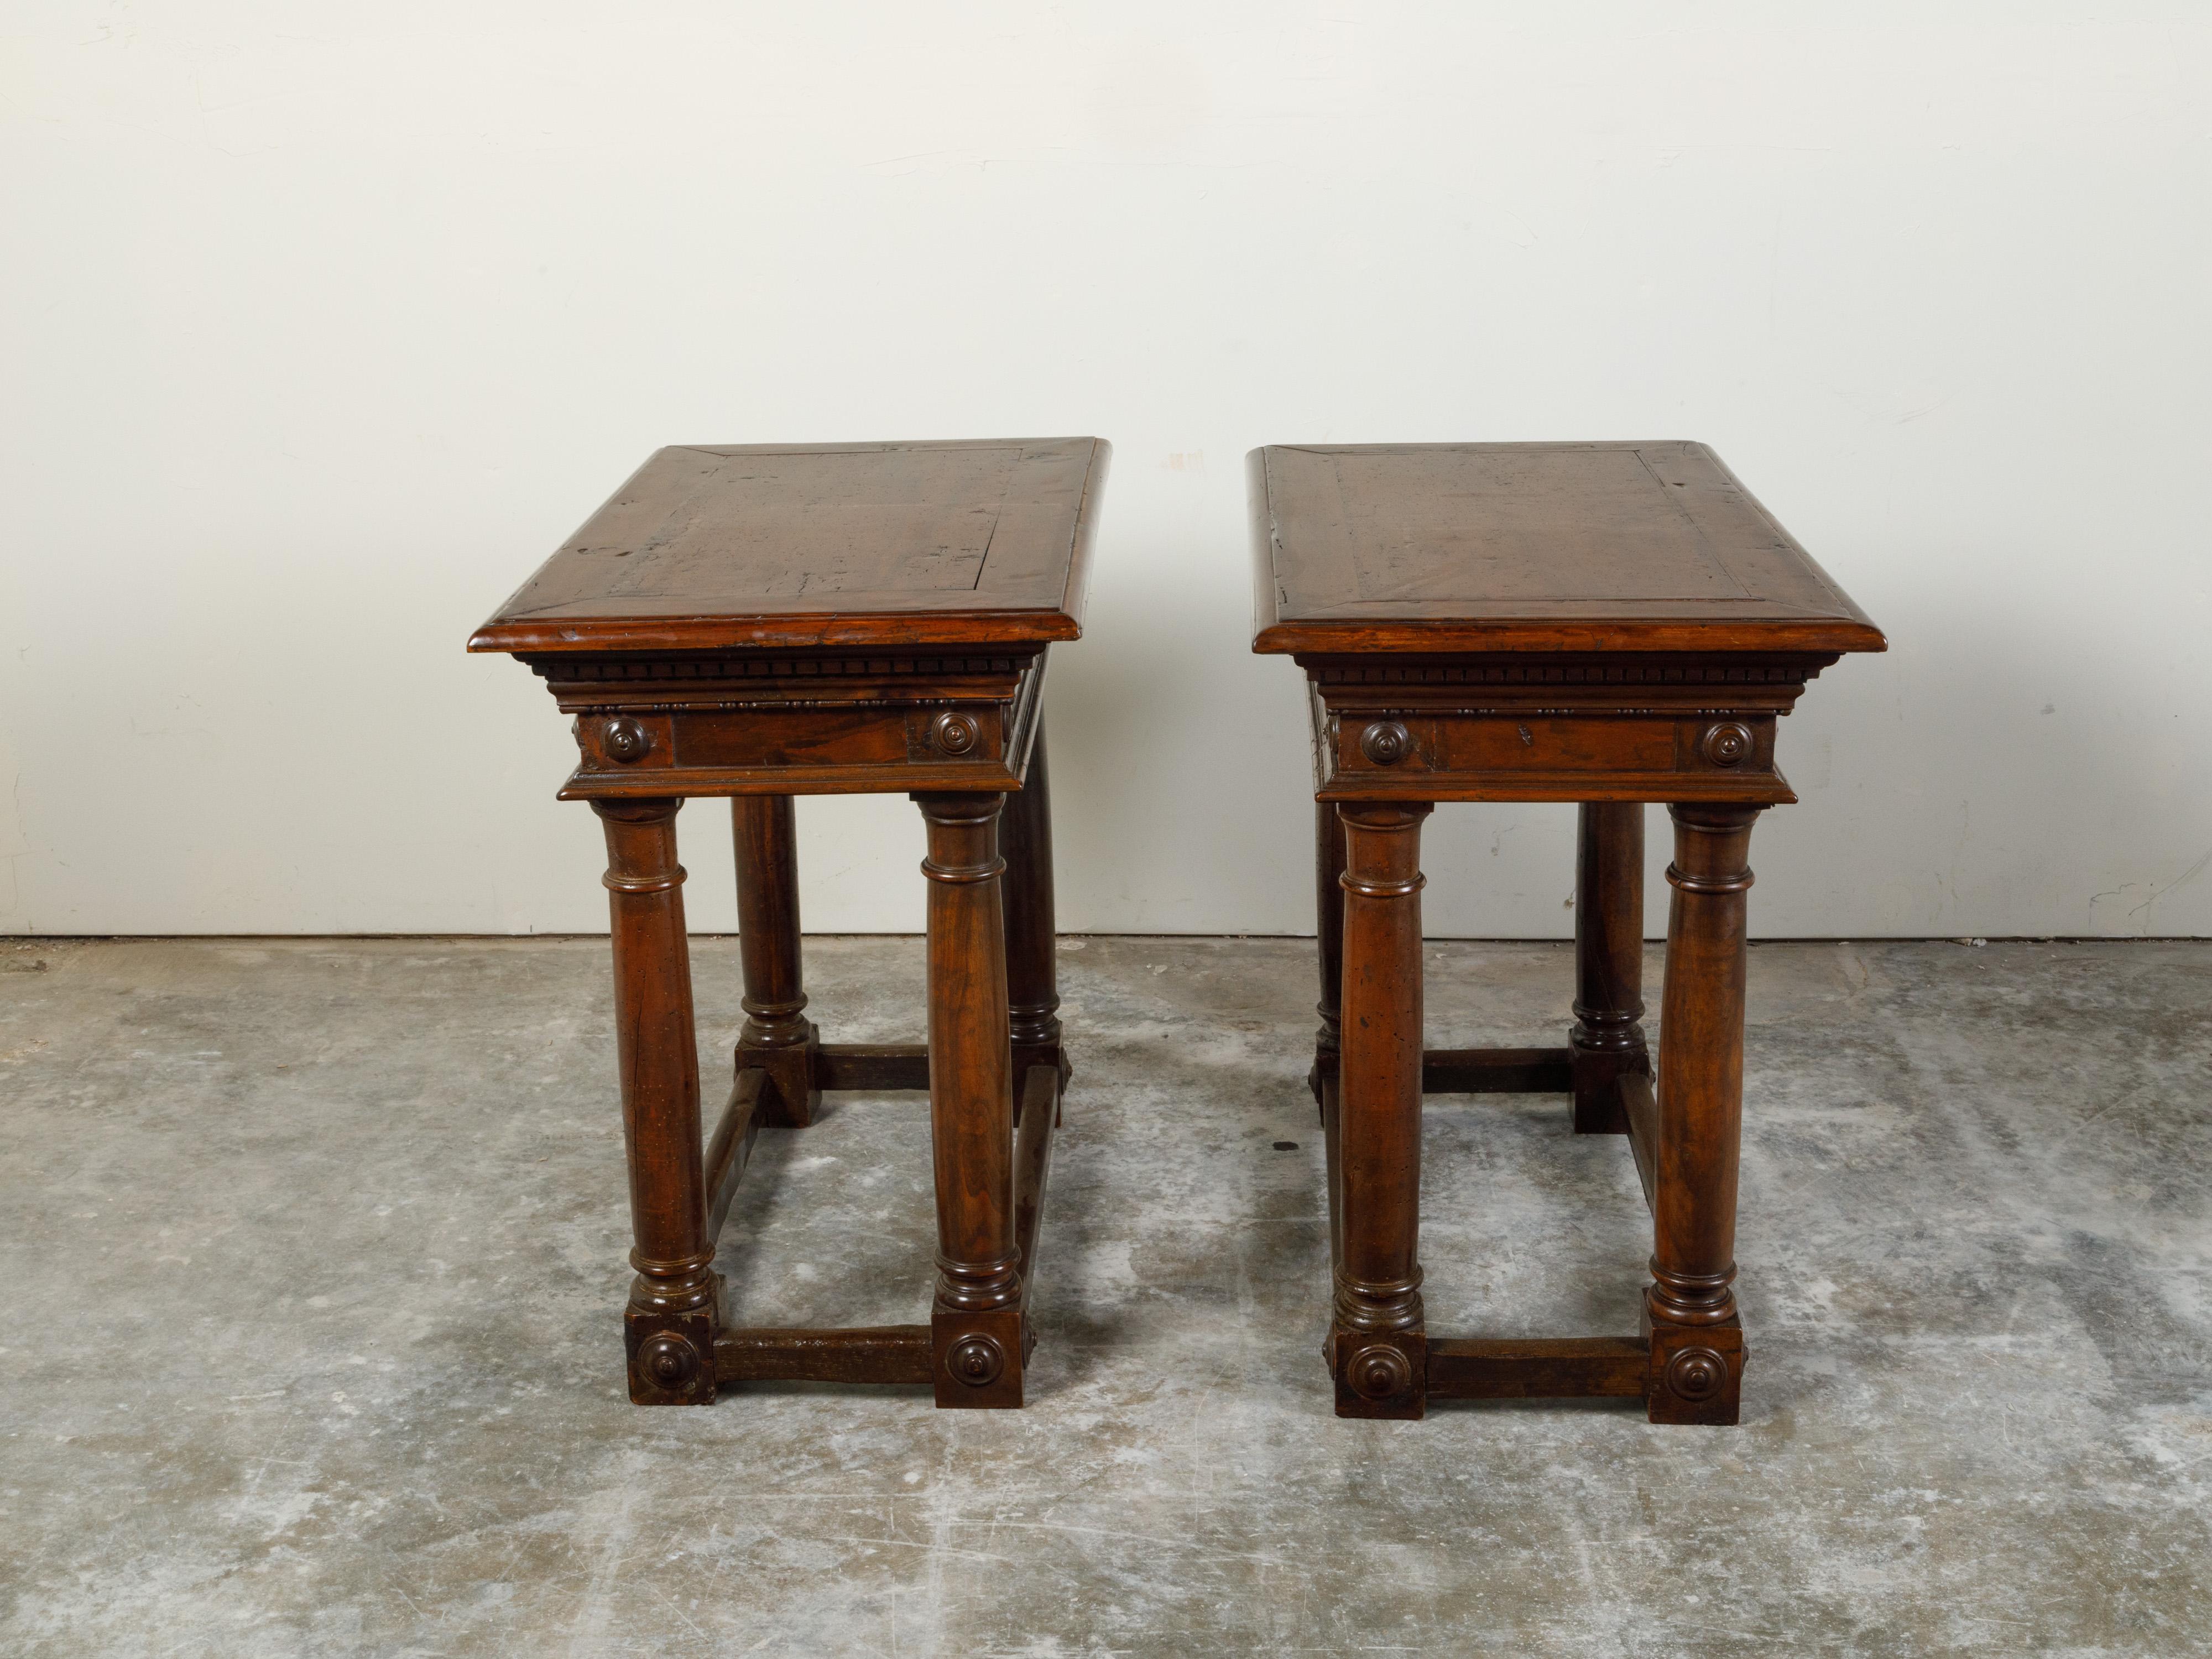 Pair of Italian 19th Century Carved Walnut Console Tables with Doric Columns For Sale 6